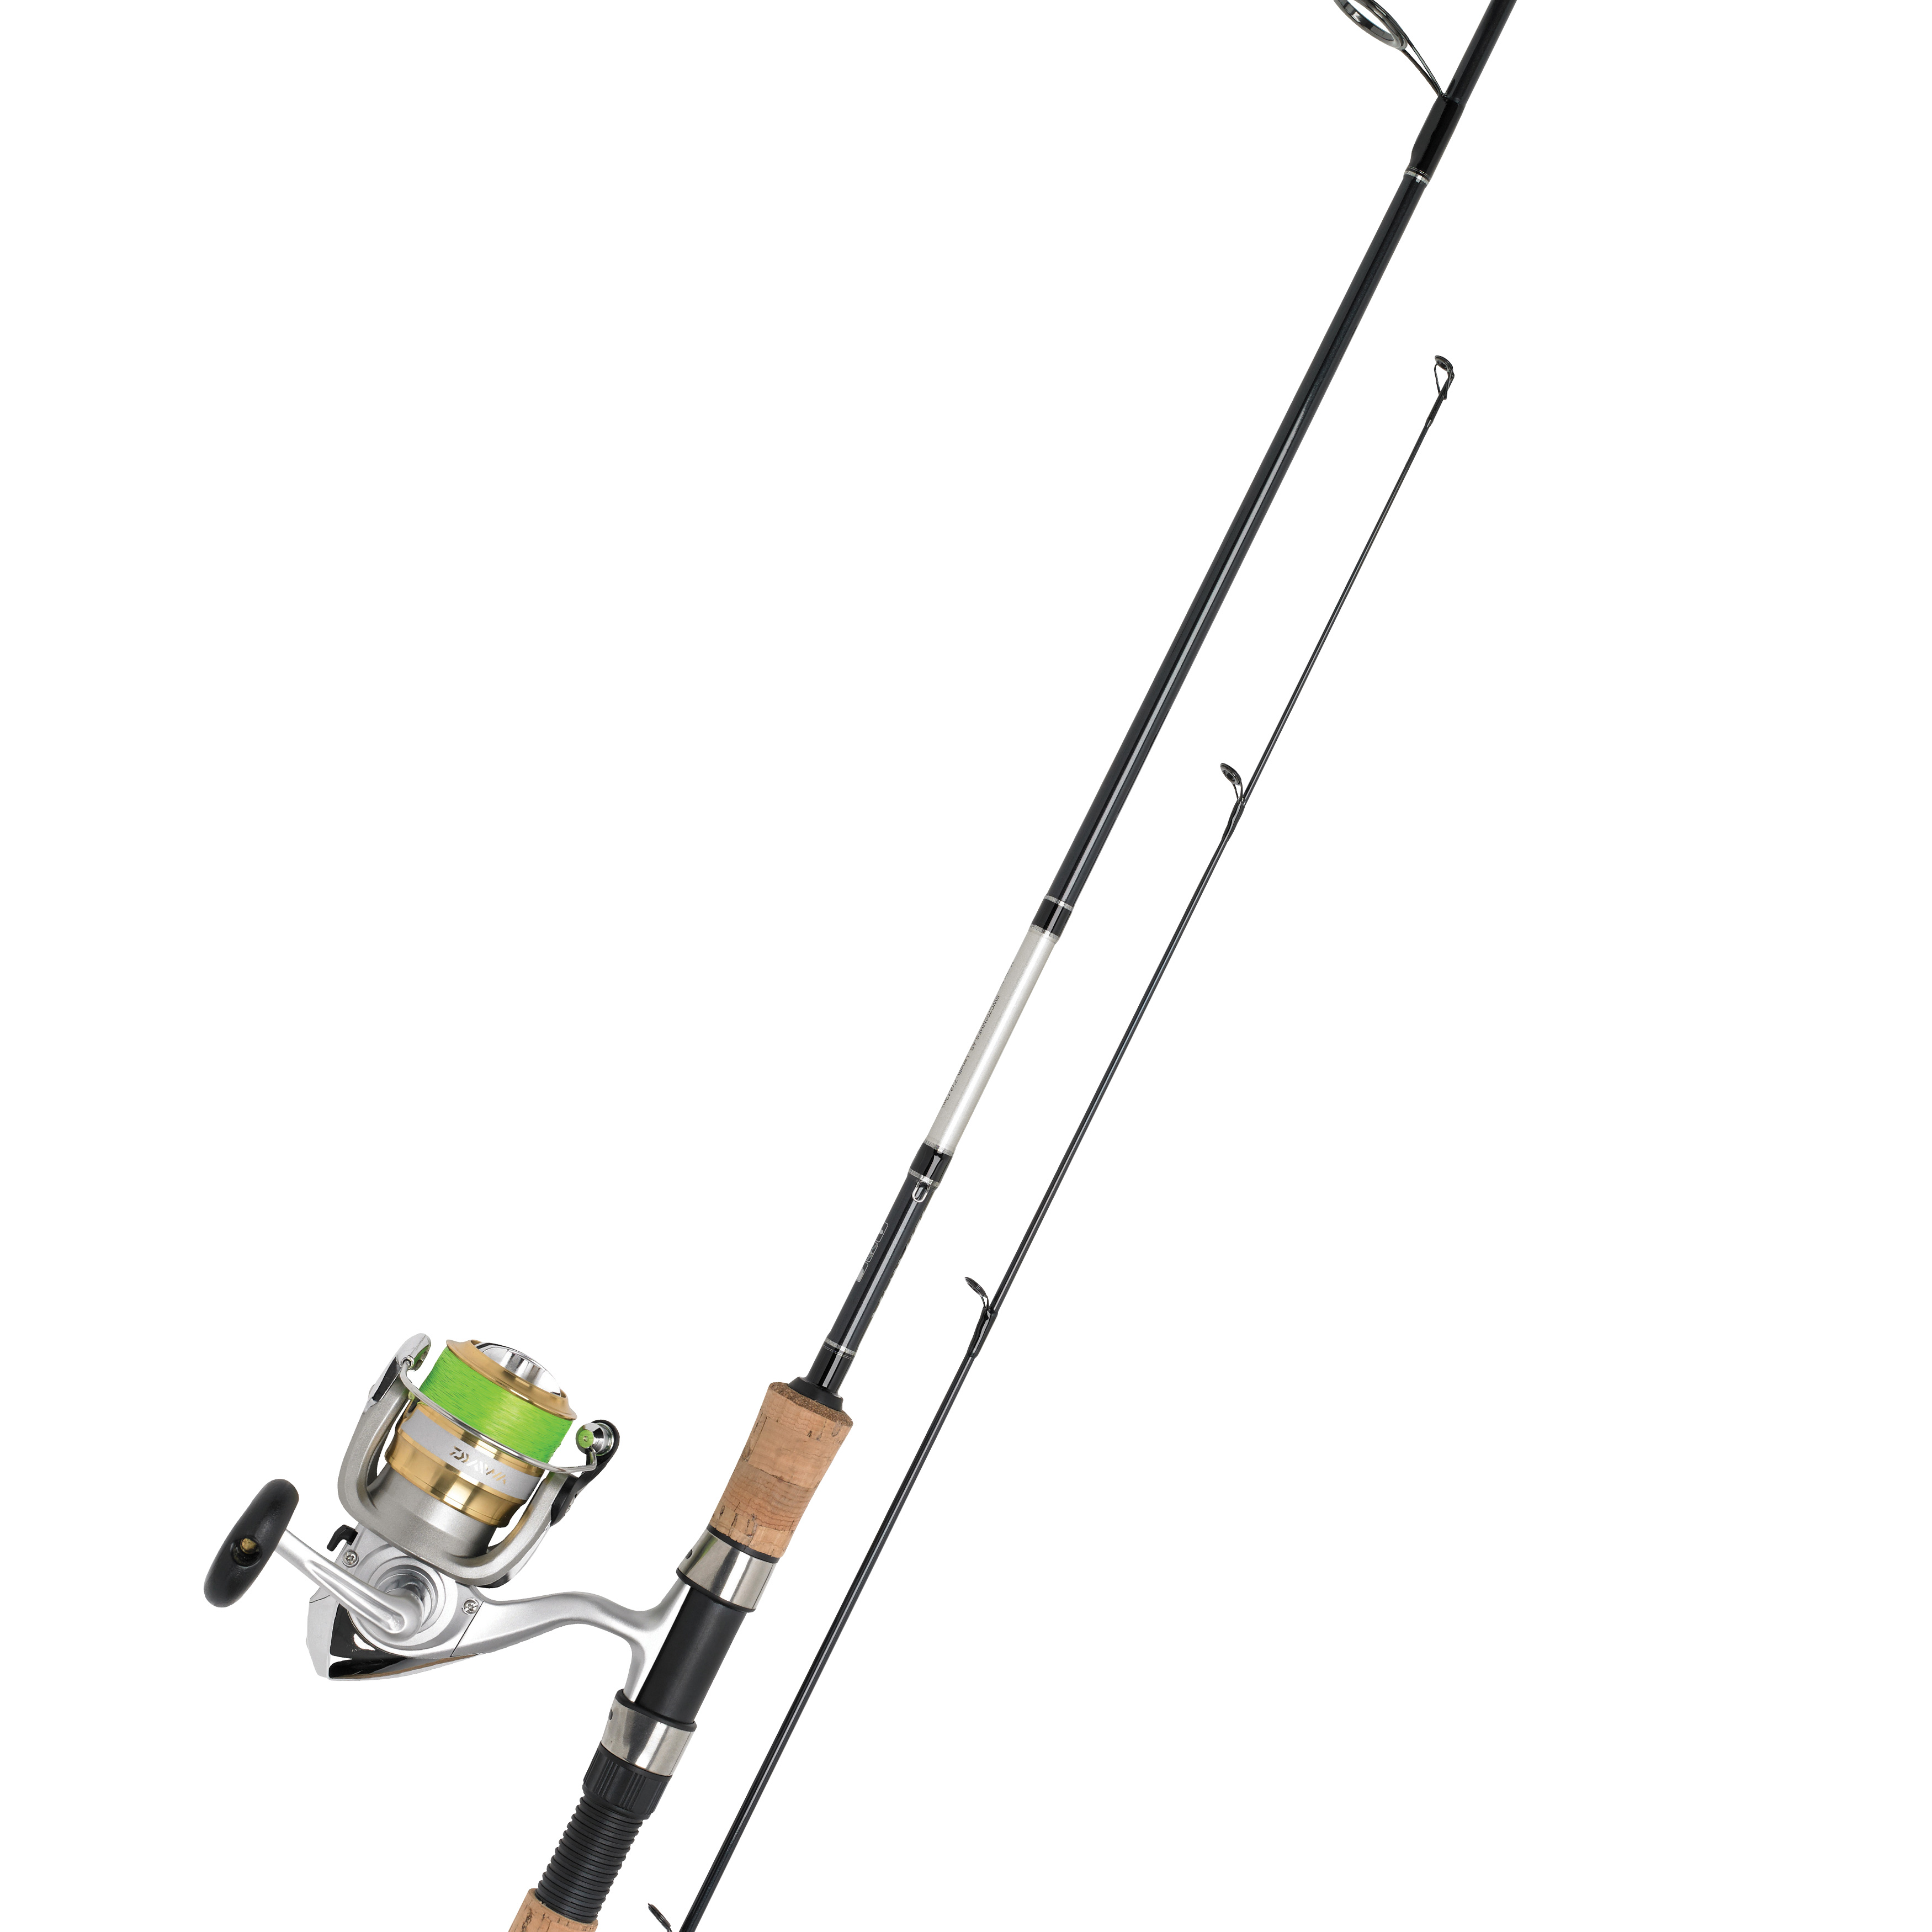 FXS 8' MH SPINNING ROD WITH DAIWA SWEEPFIRE 5000-2B REEL COMBO KVSPMR0219 